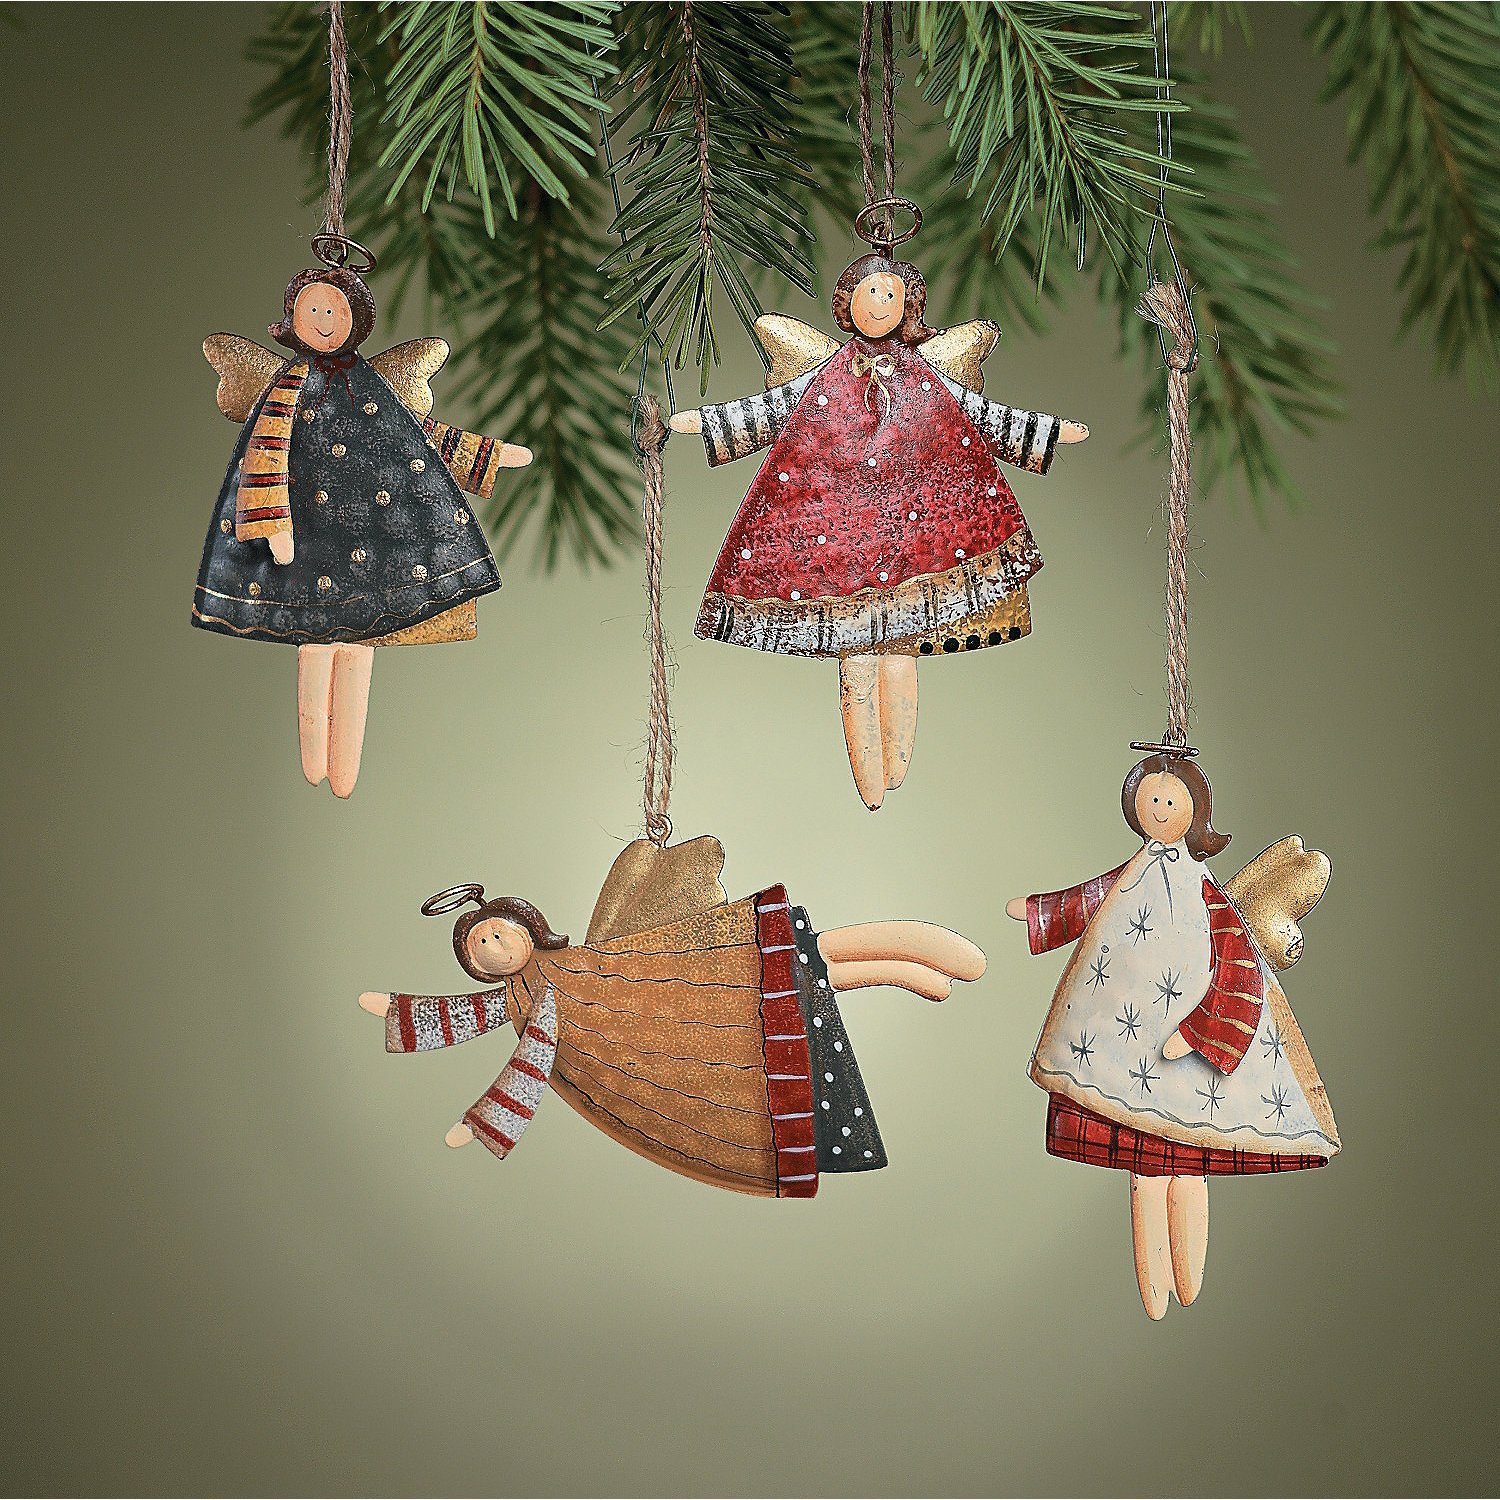 manufactured Christmas ornaments